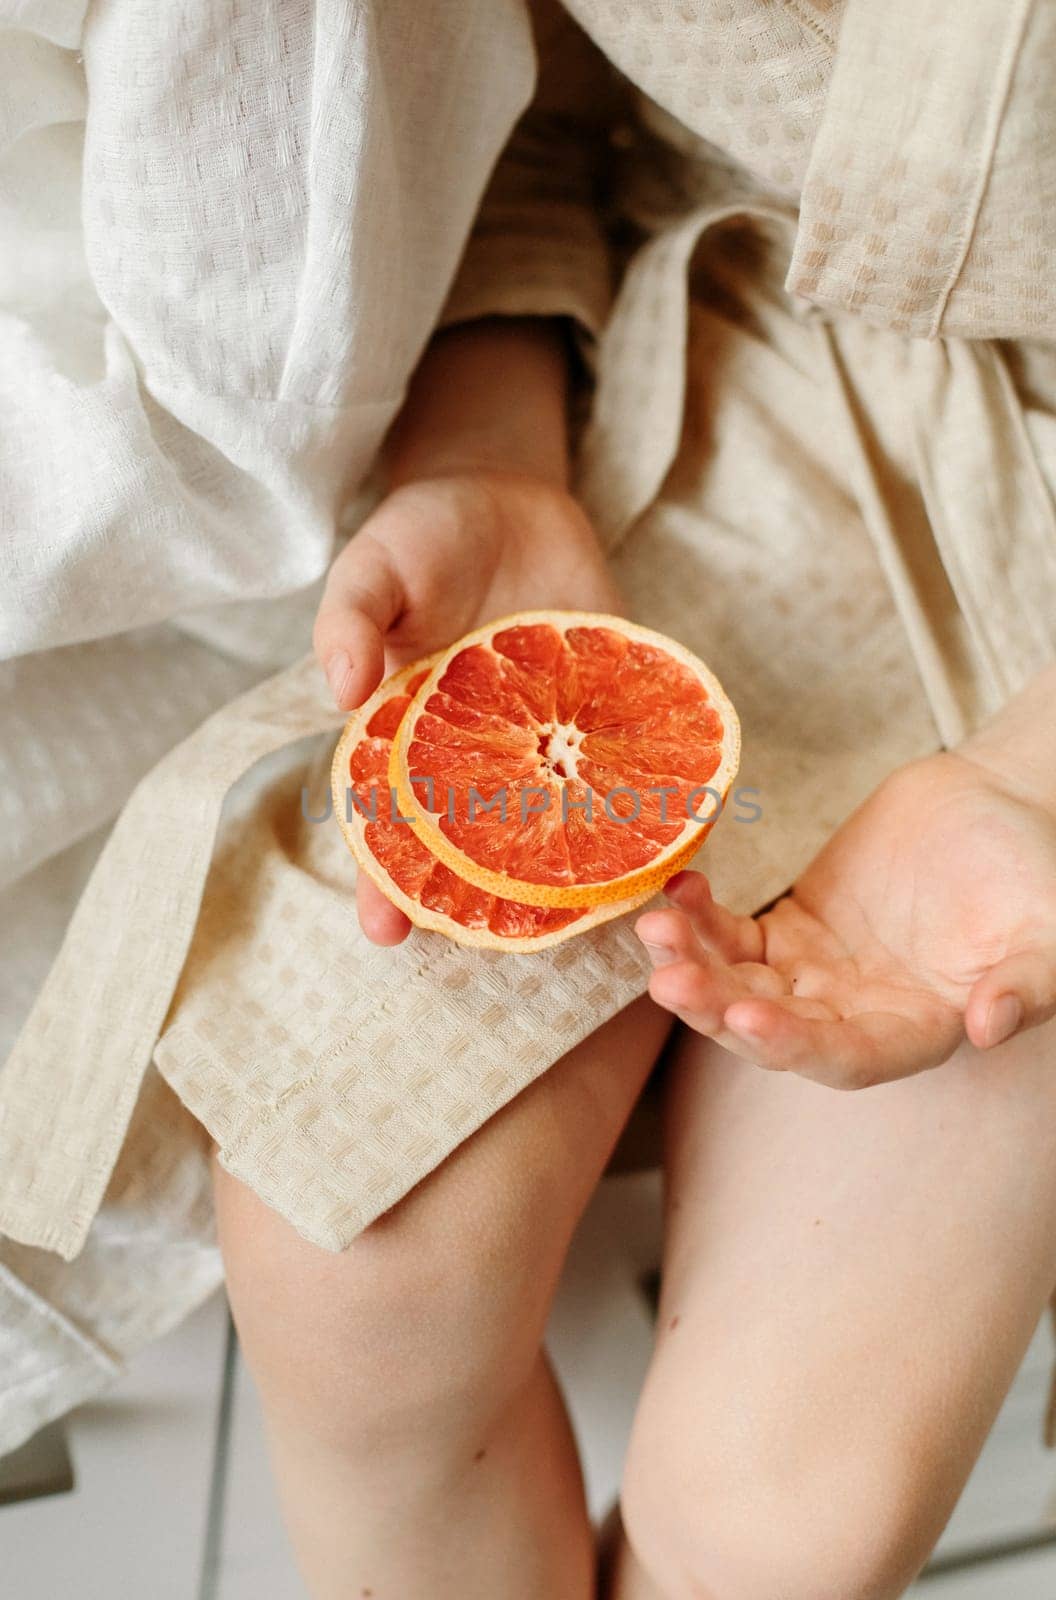 Candied oranges in the hands of a child. Close-up, vertical frame.